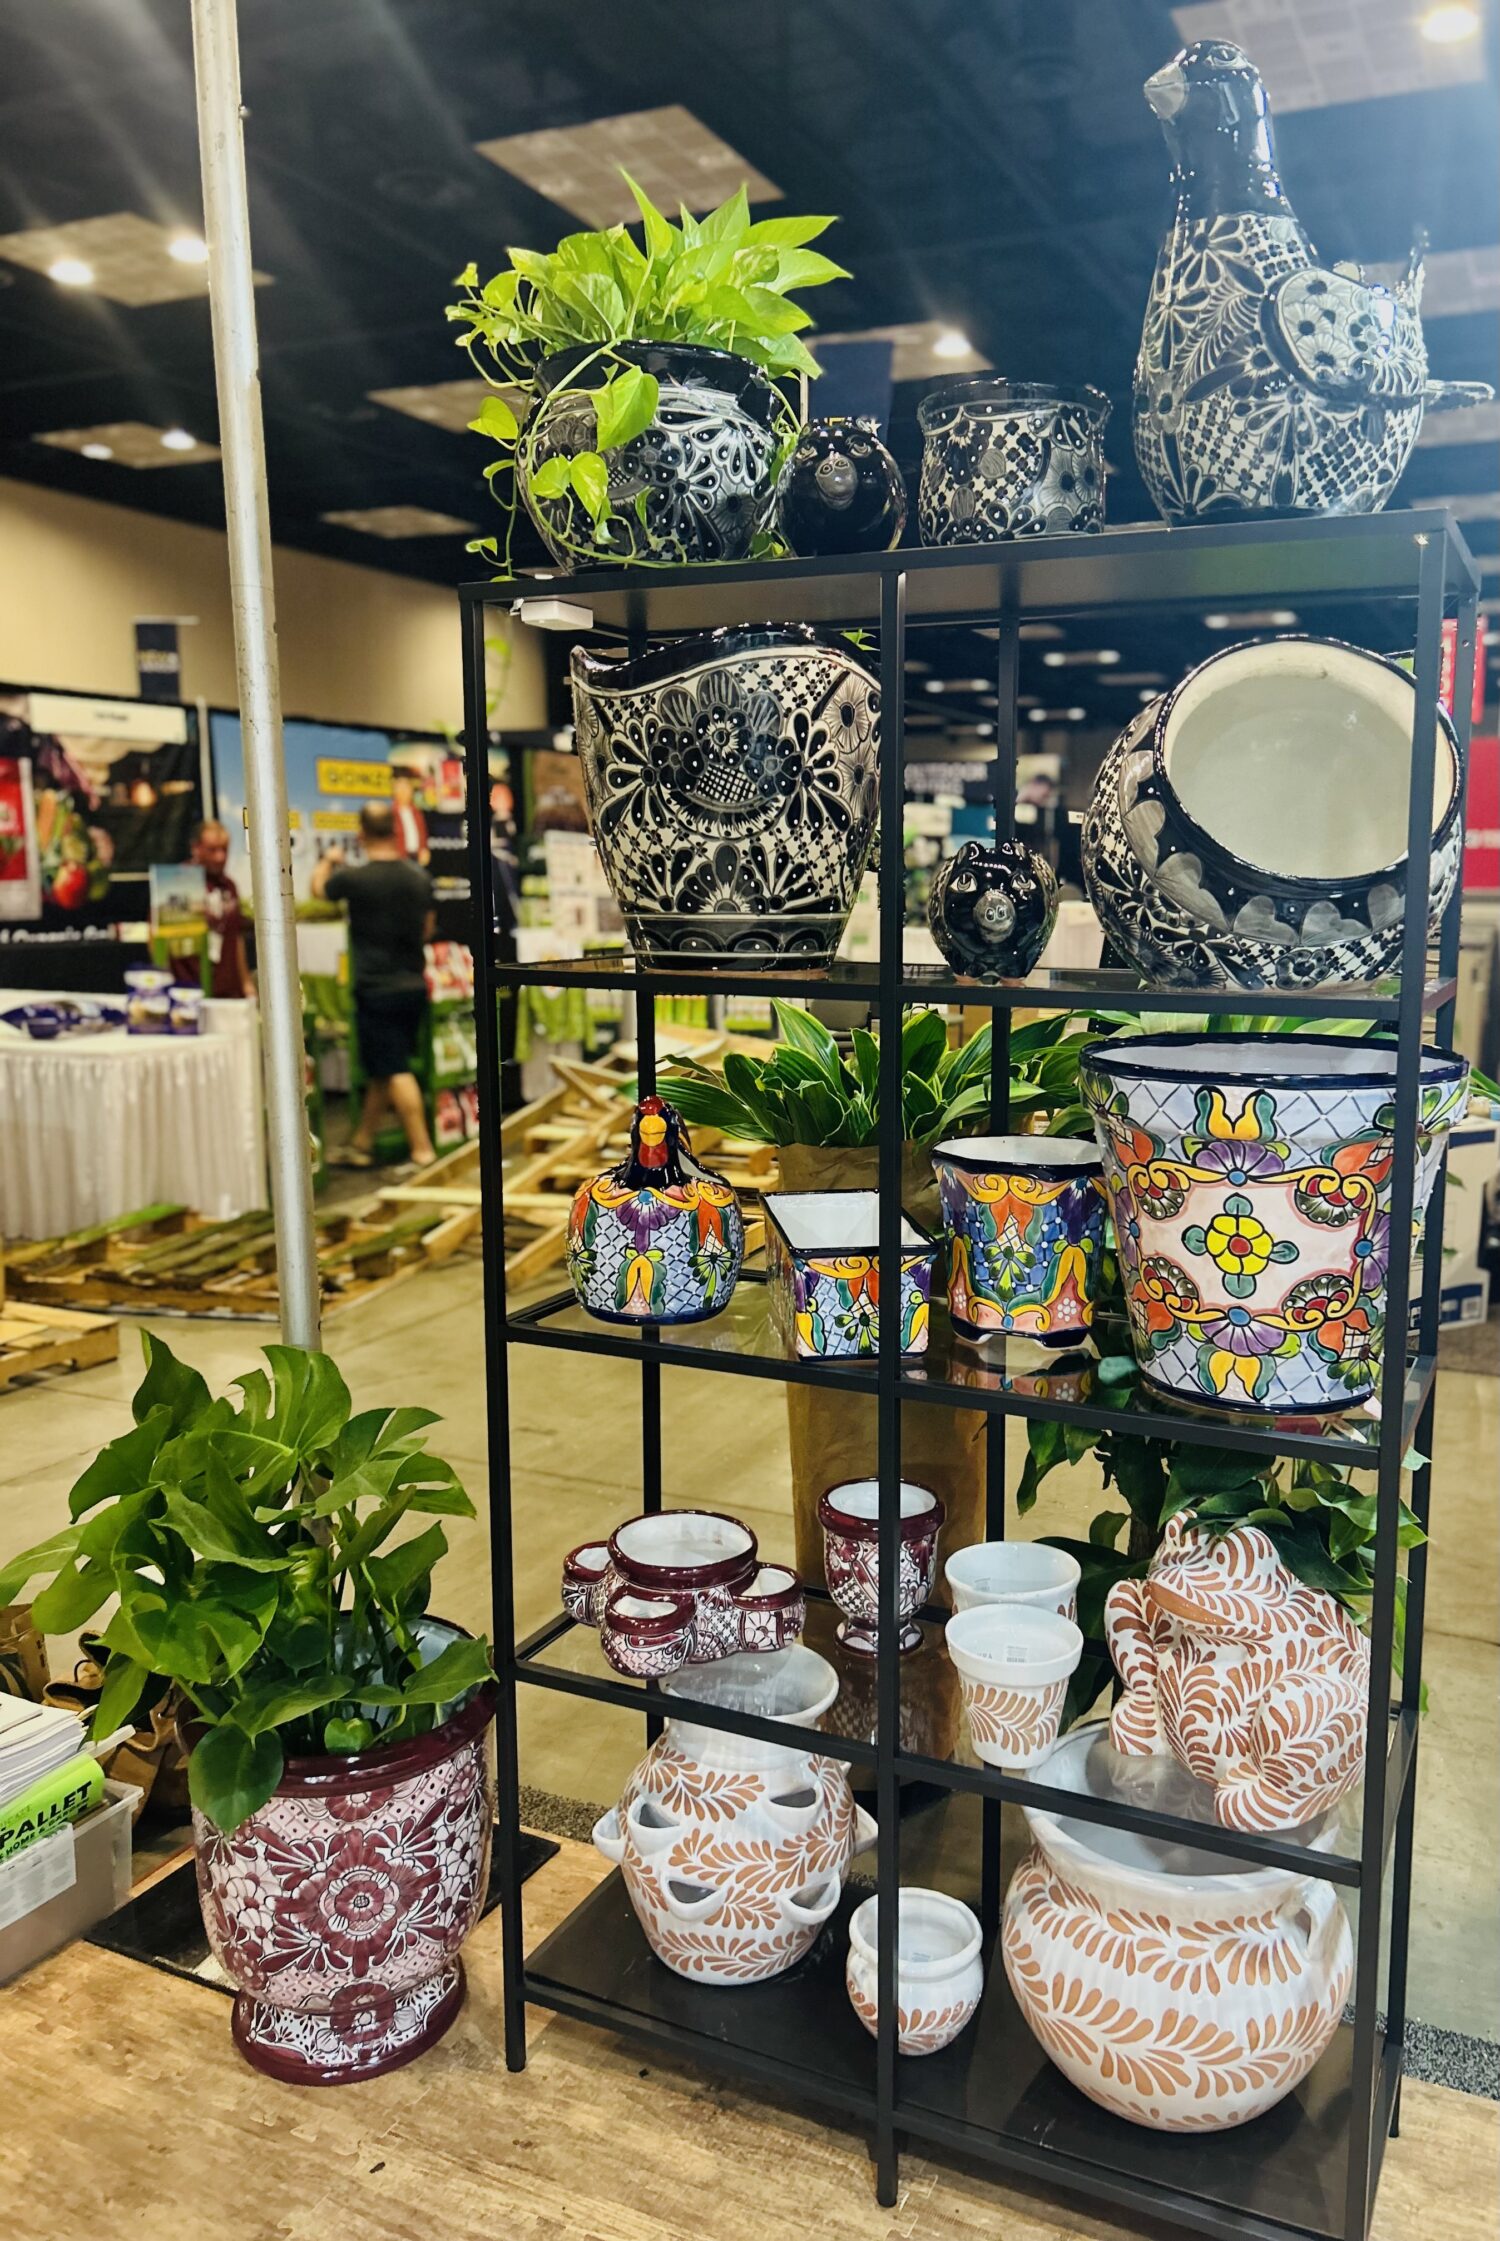 Avera Products’ Rachel du Bois said the company has seen an increase in its hand-painted Talavera pottery. Photo courtesy of Avera Products.